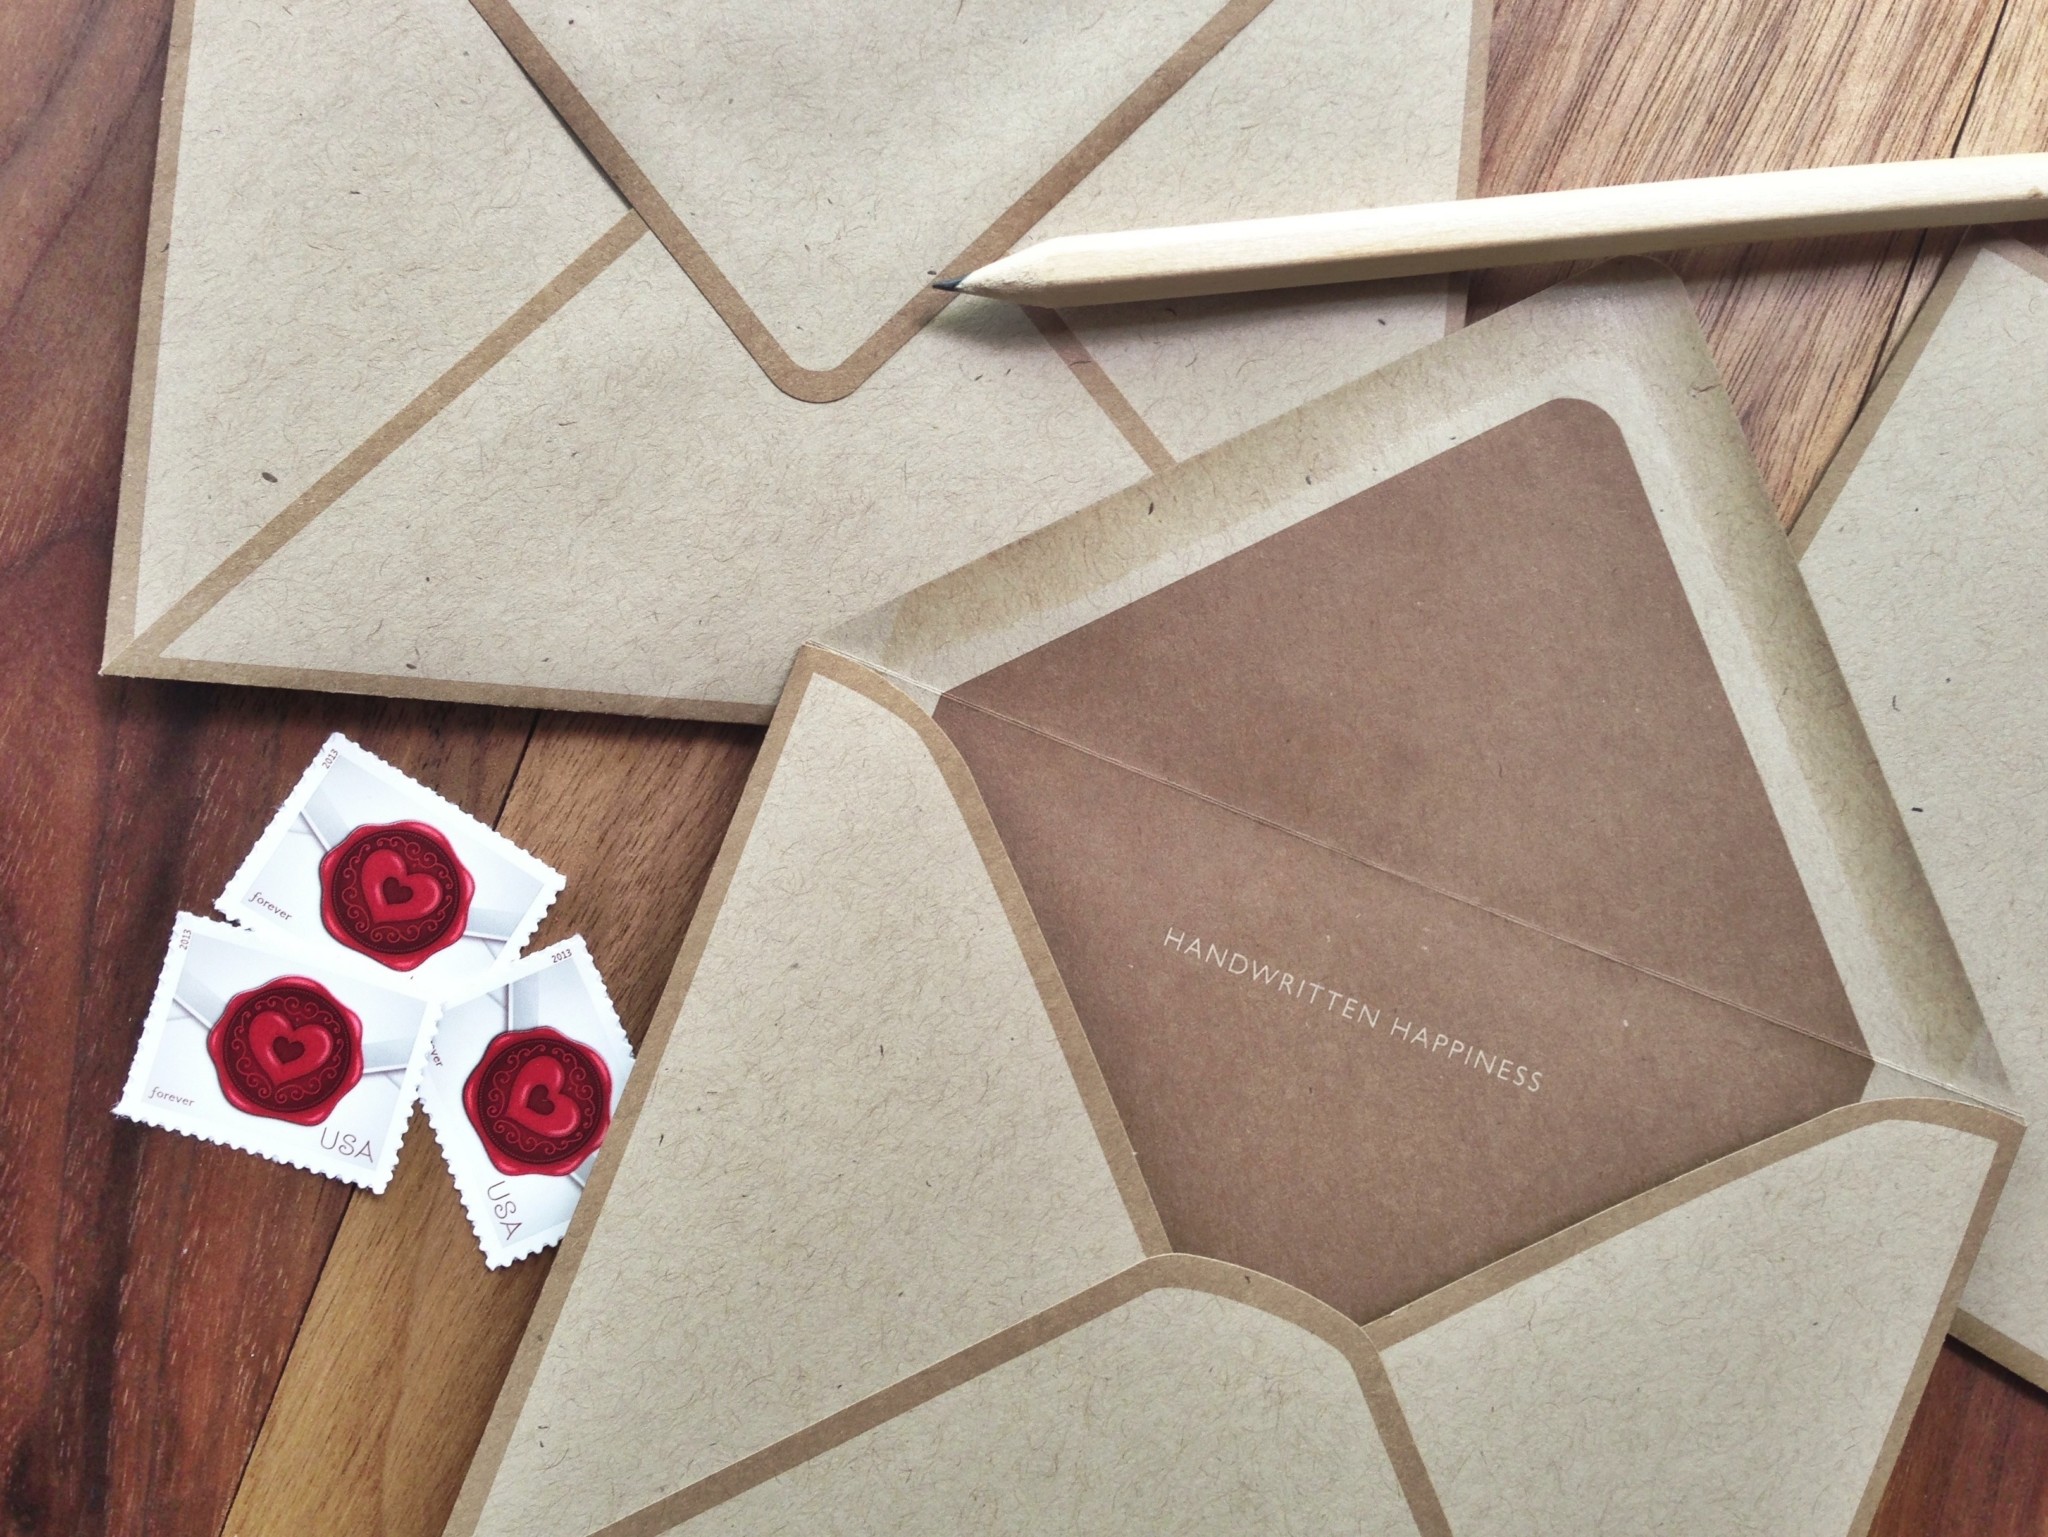 Brown kraft envelope is open and "handwritten happiness" is visible on the brown printed liner